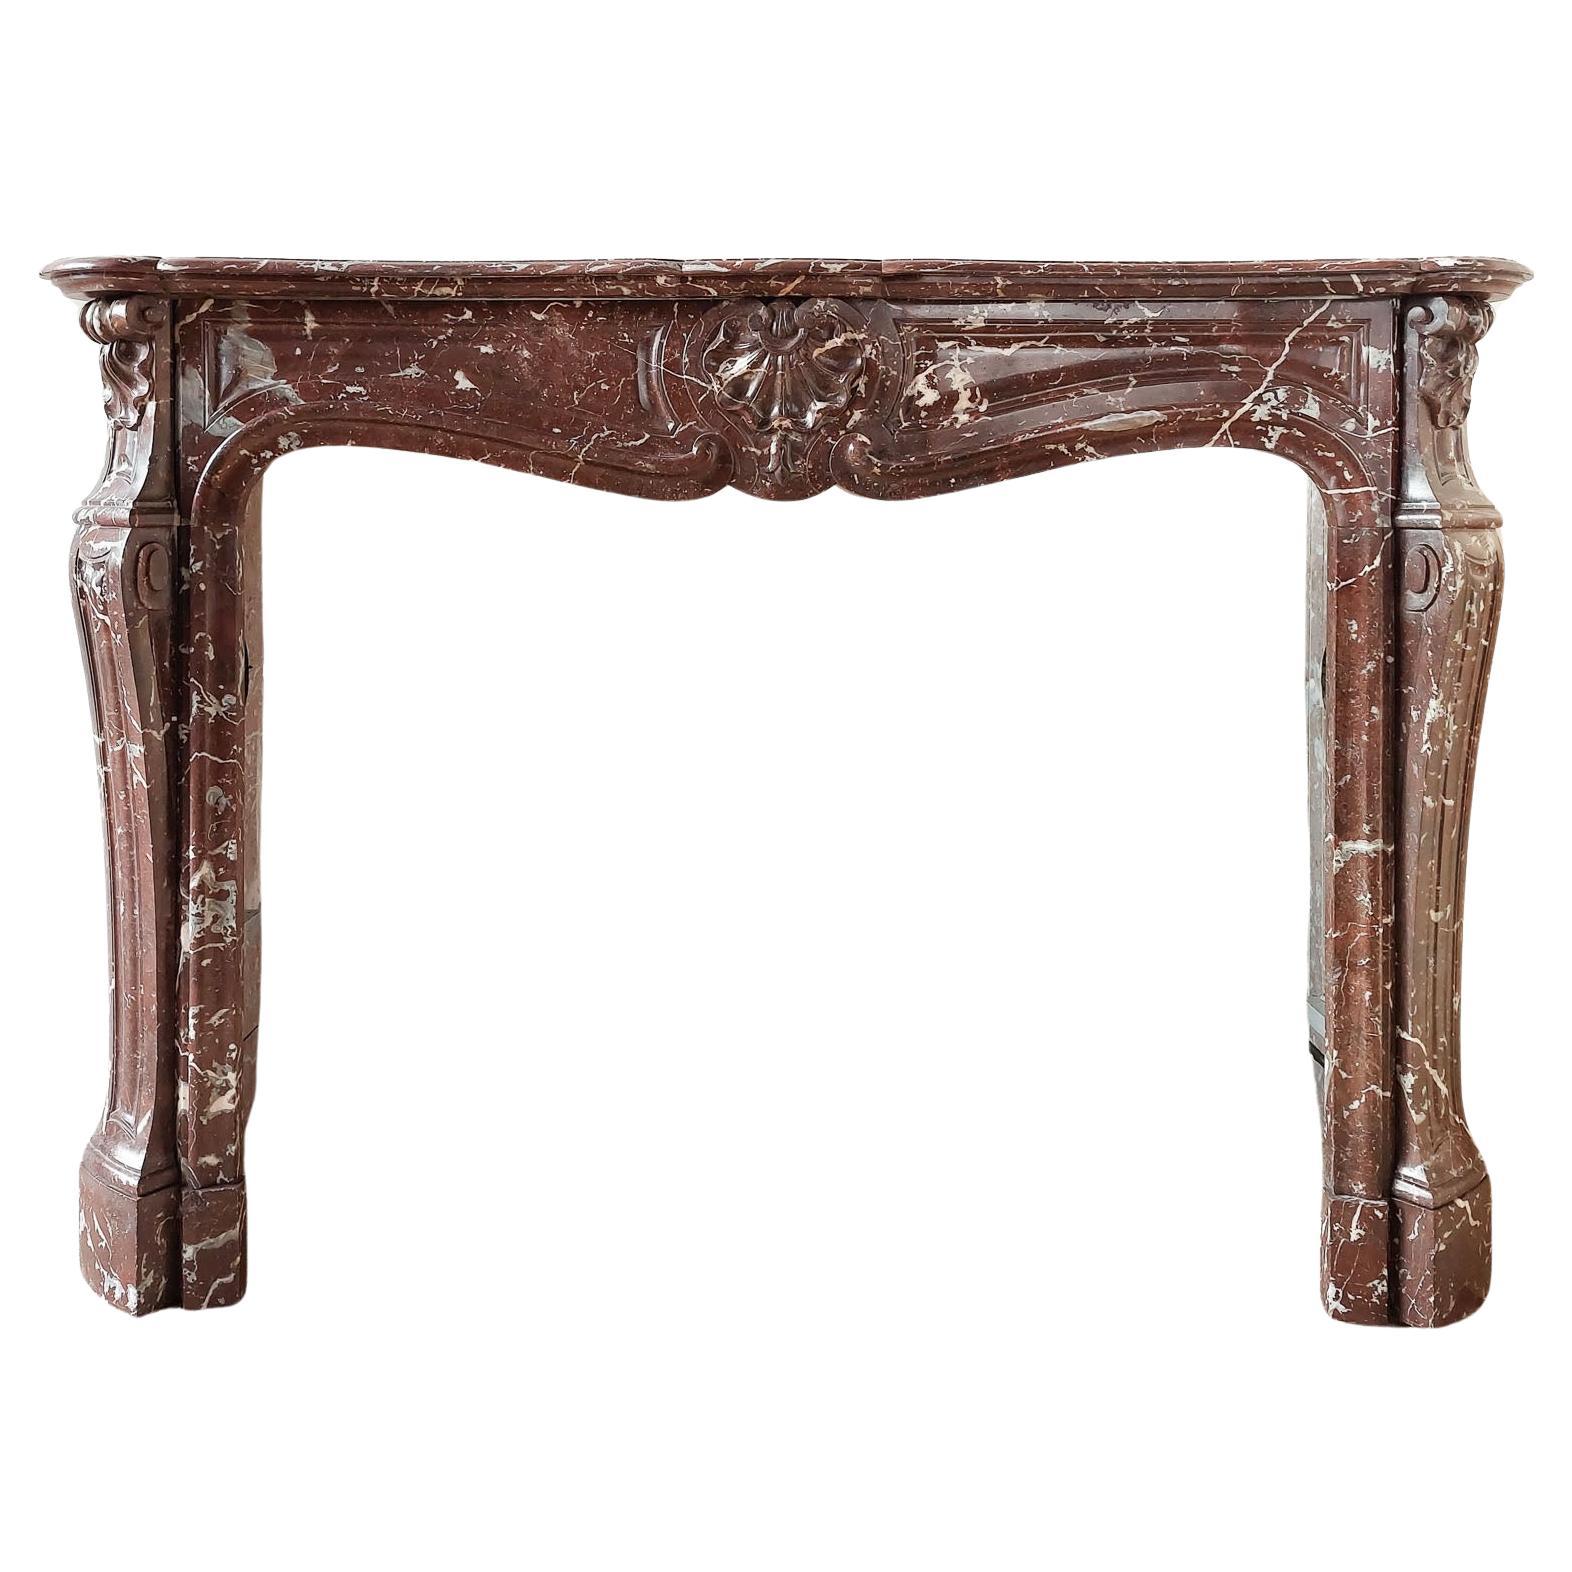 Antique, rich, hand-carved Trois Coquilles mantelpiece in red marble